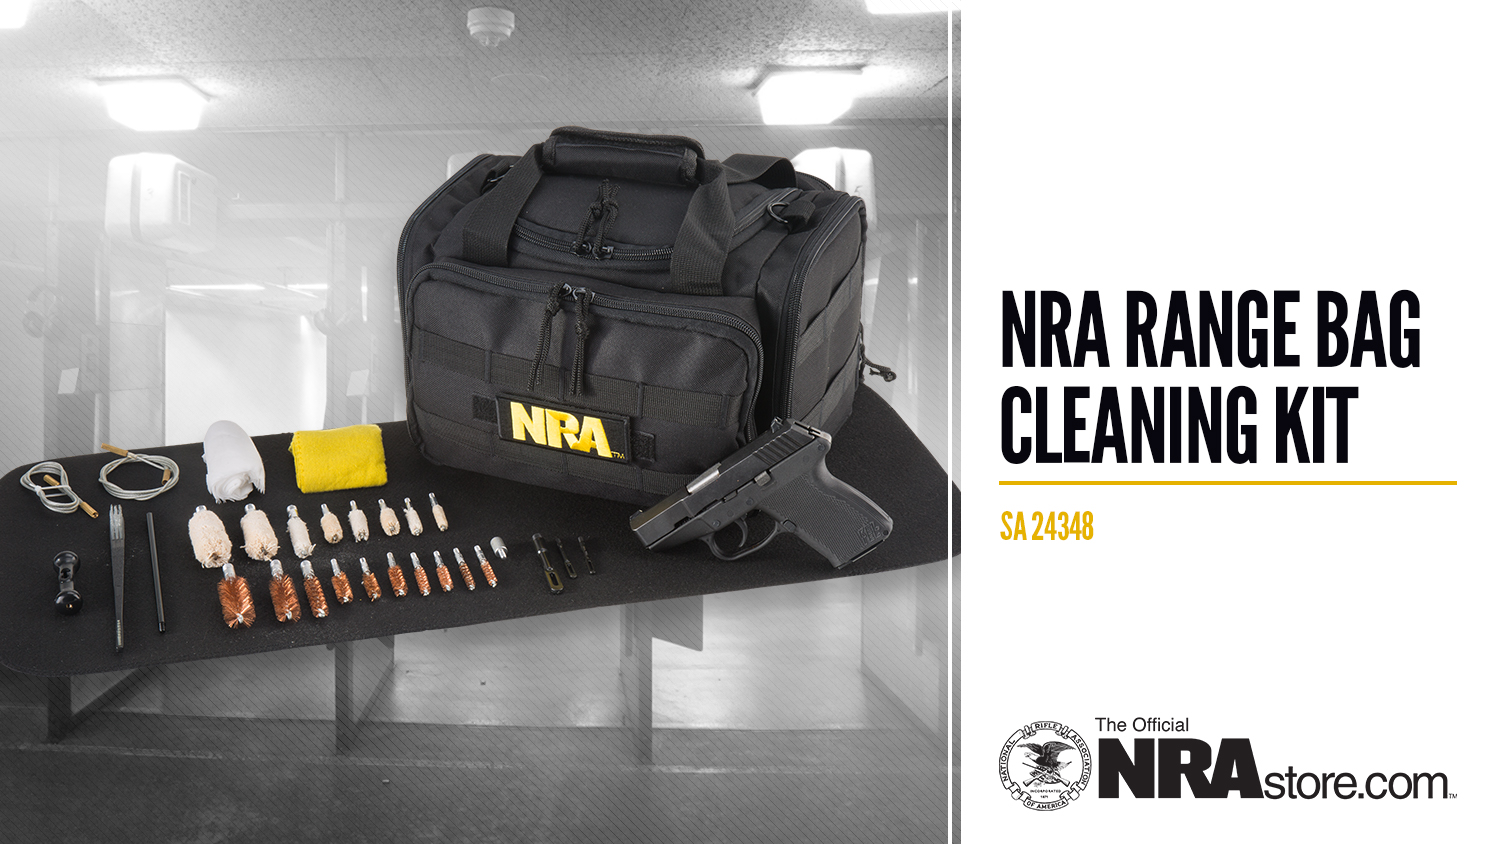 NRA Store Product Highlight: Range Bag Cleaning Kit